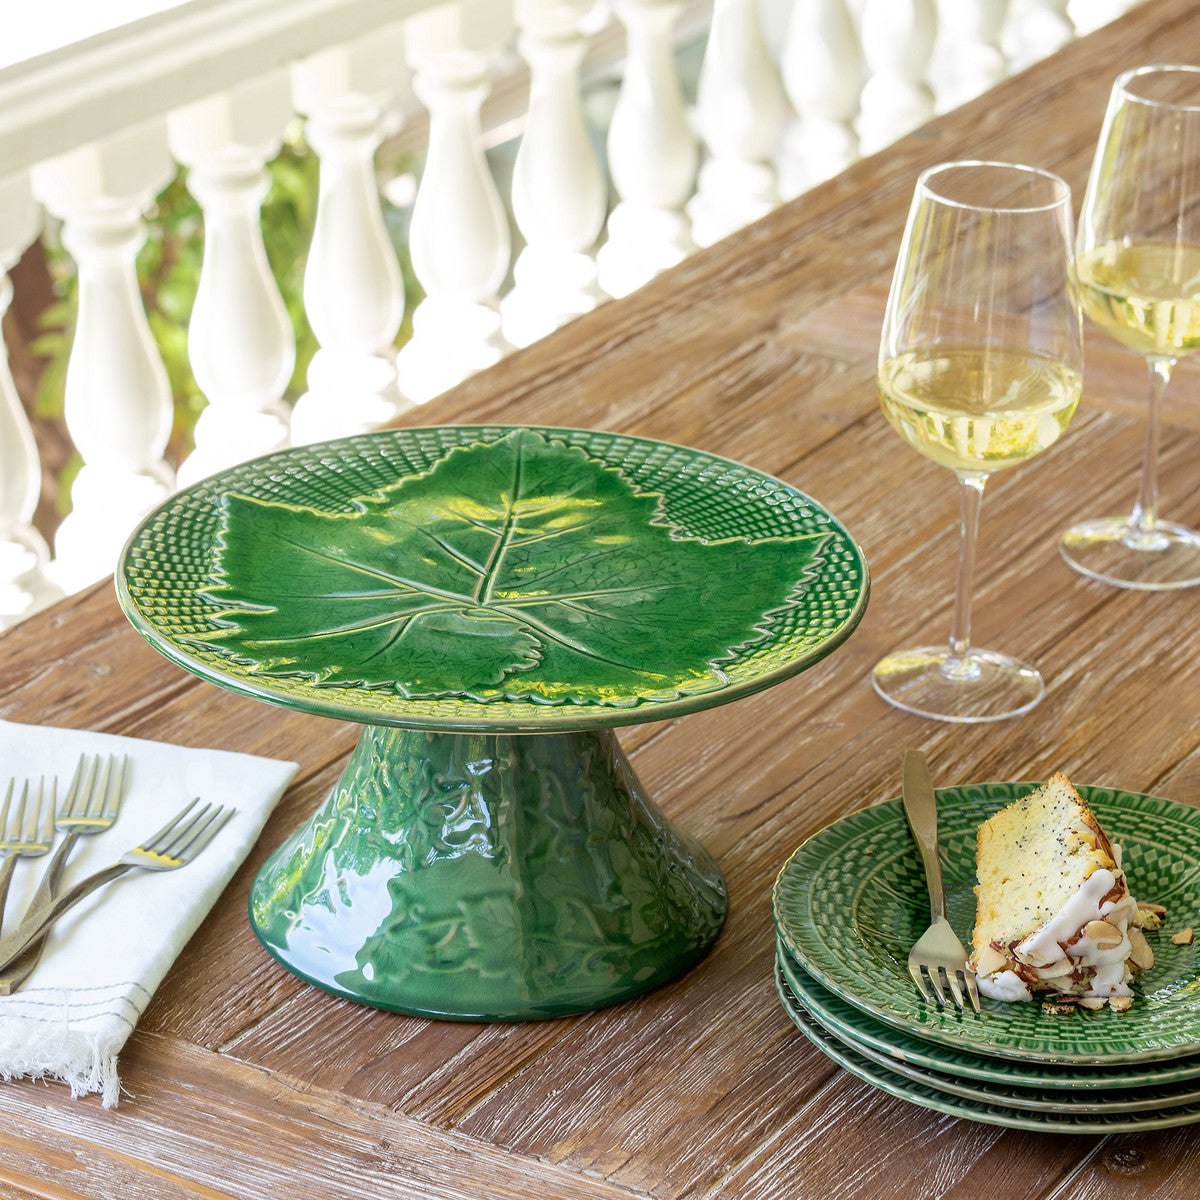 Green Glazed Cake Stand - Small